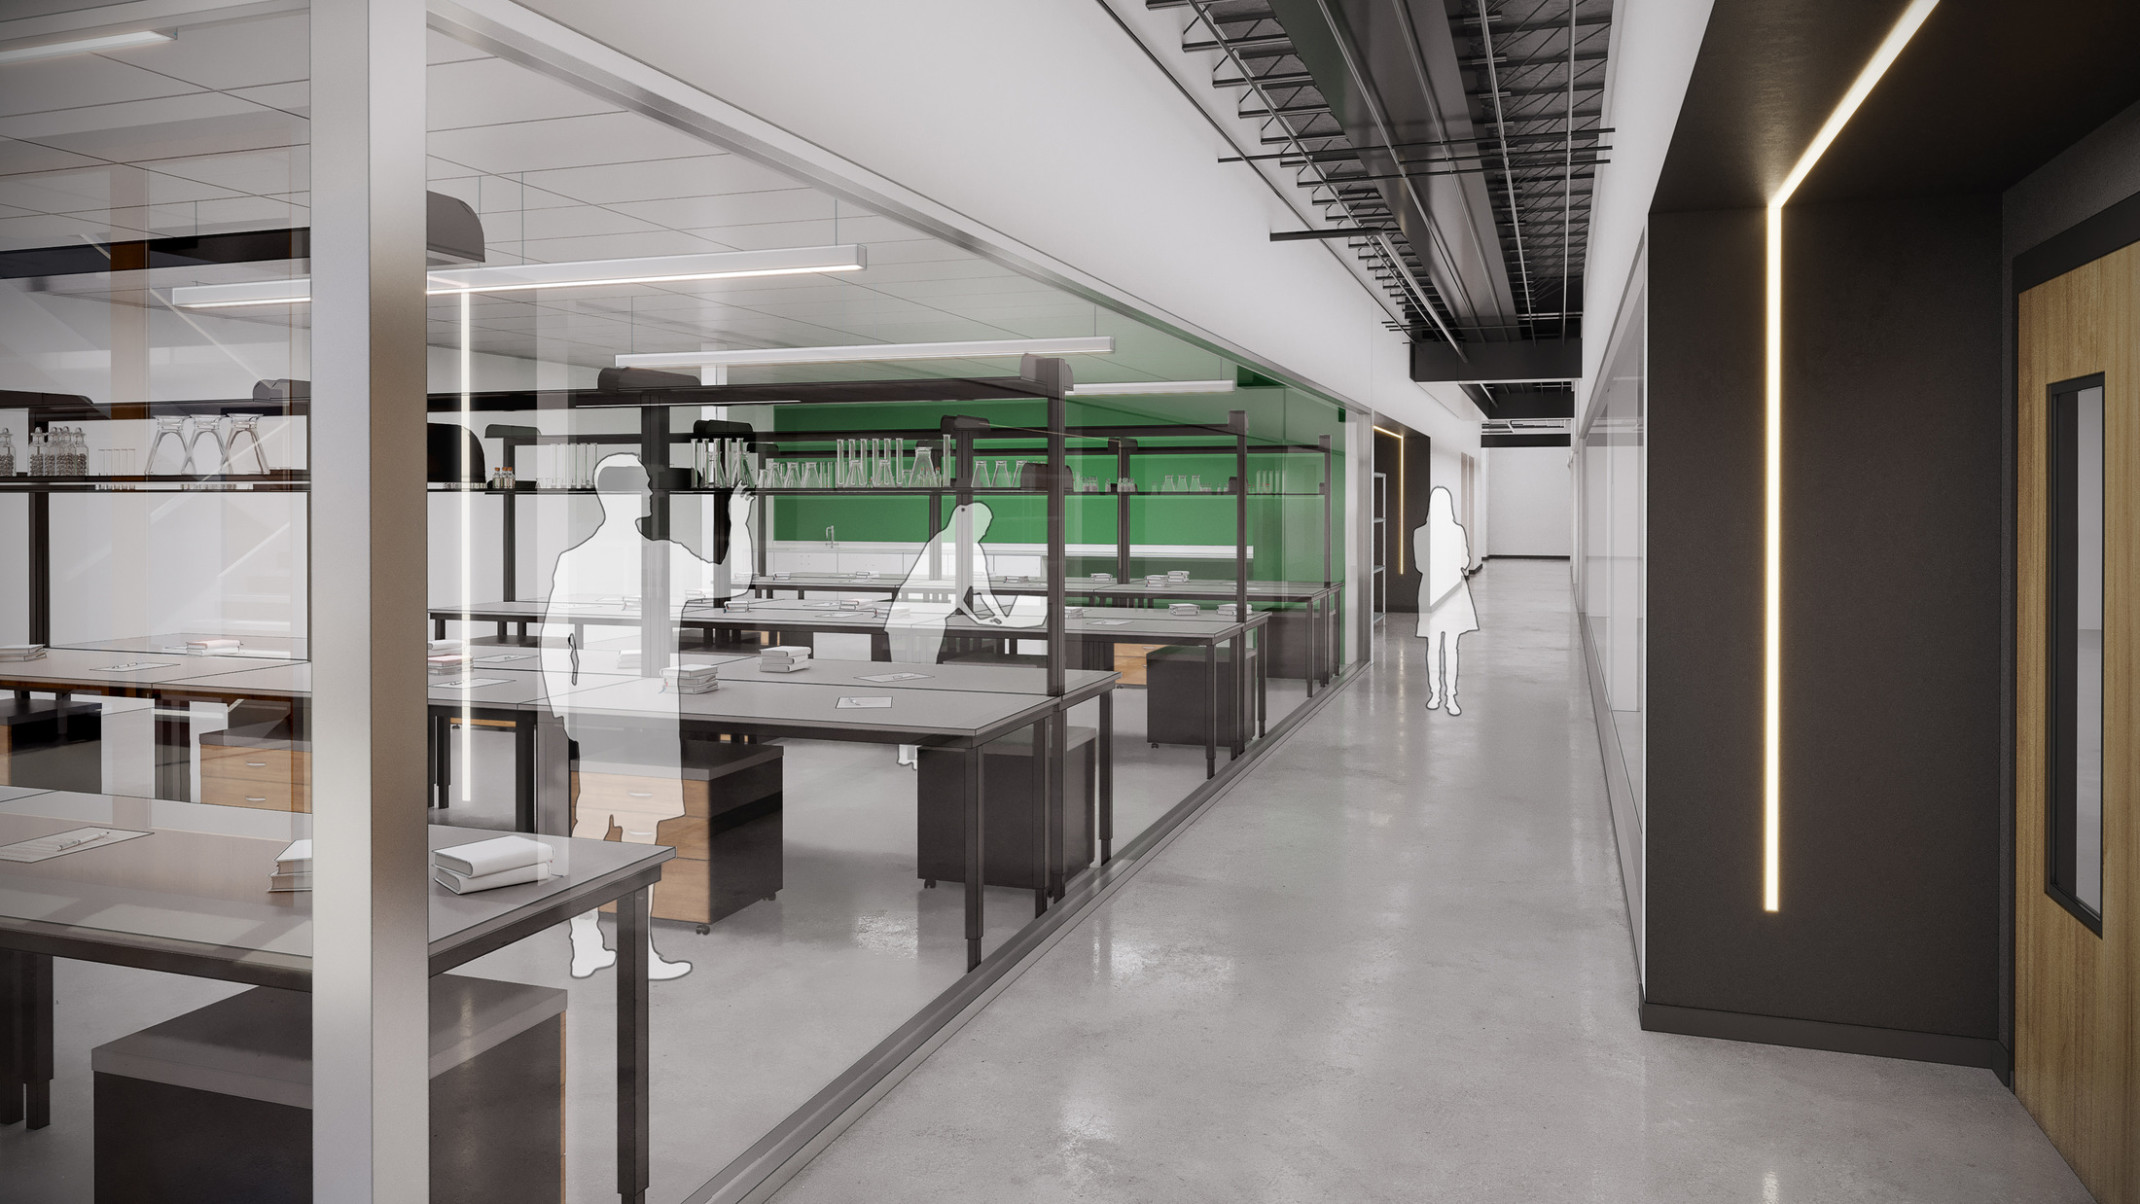 design concept for a science lab with open desking, beakers on open shelves, and a green accent wall